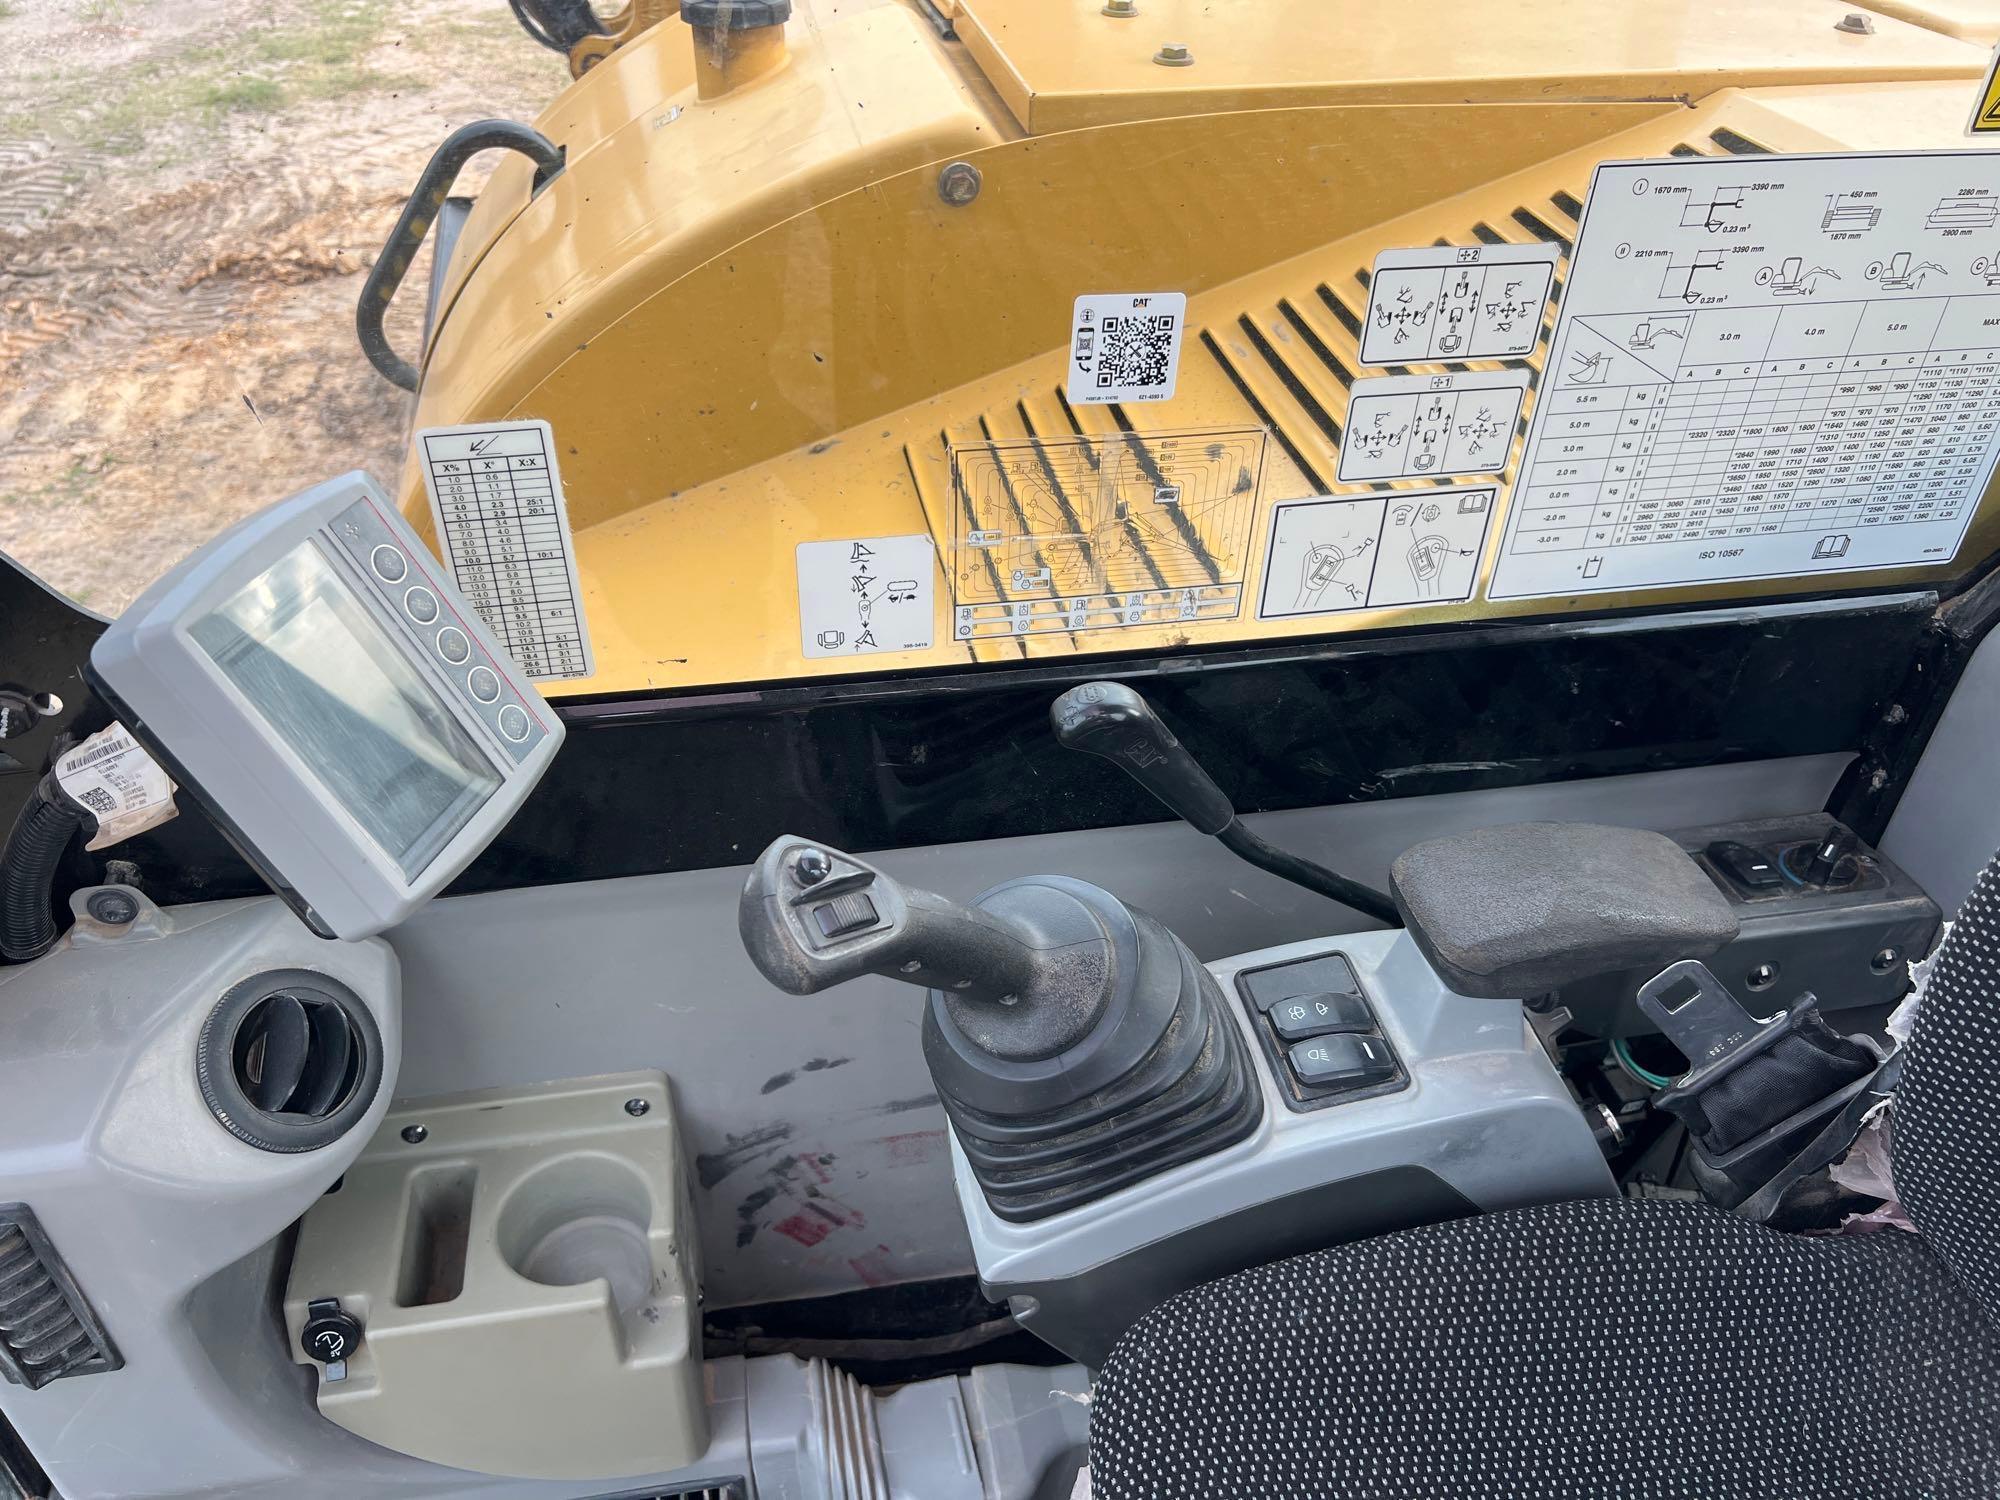 2018 CAT 308CR HYDRAULIC EXCAVATOR SN:FJX11307 powered by Cat diesel engine, equipped with Cab, air,